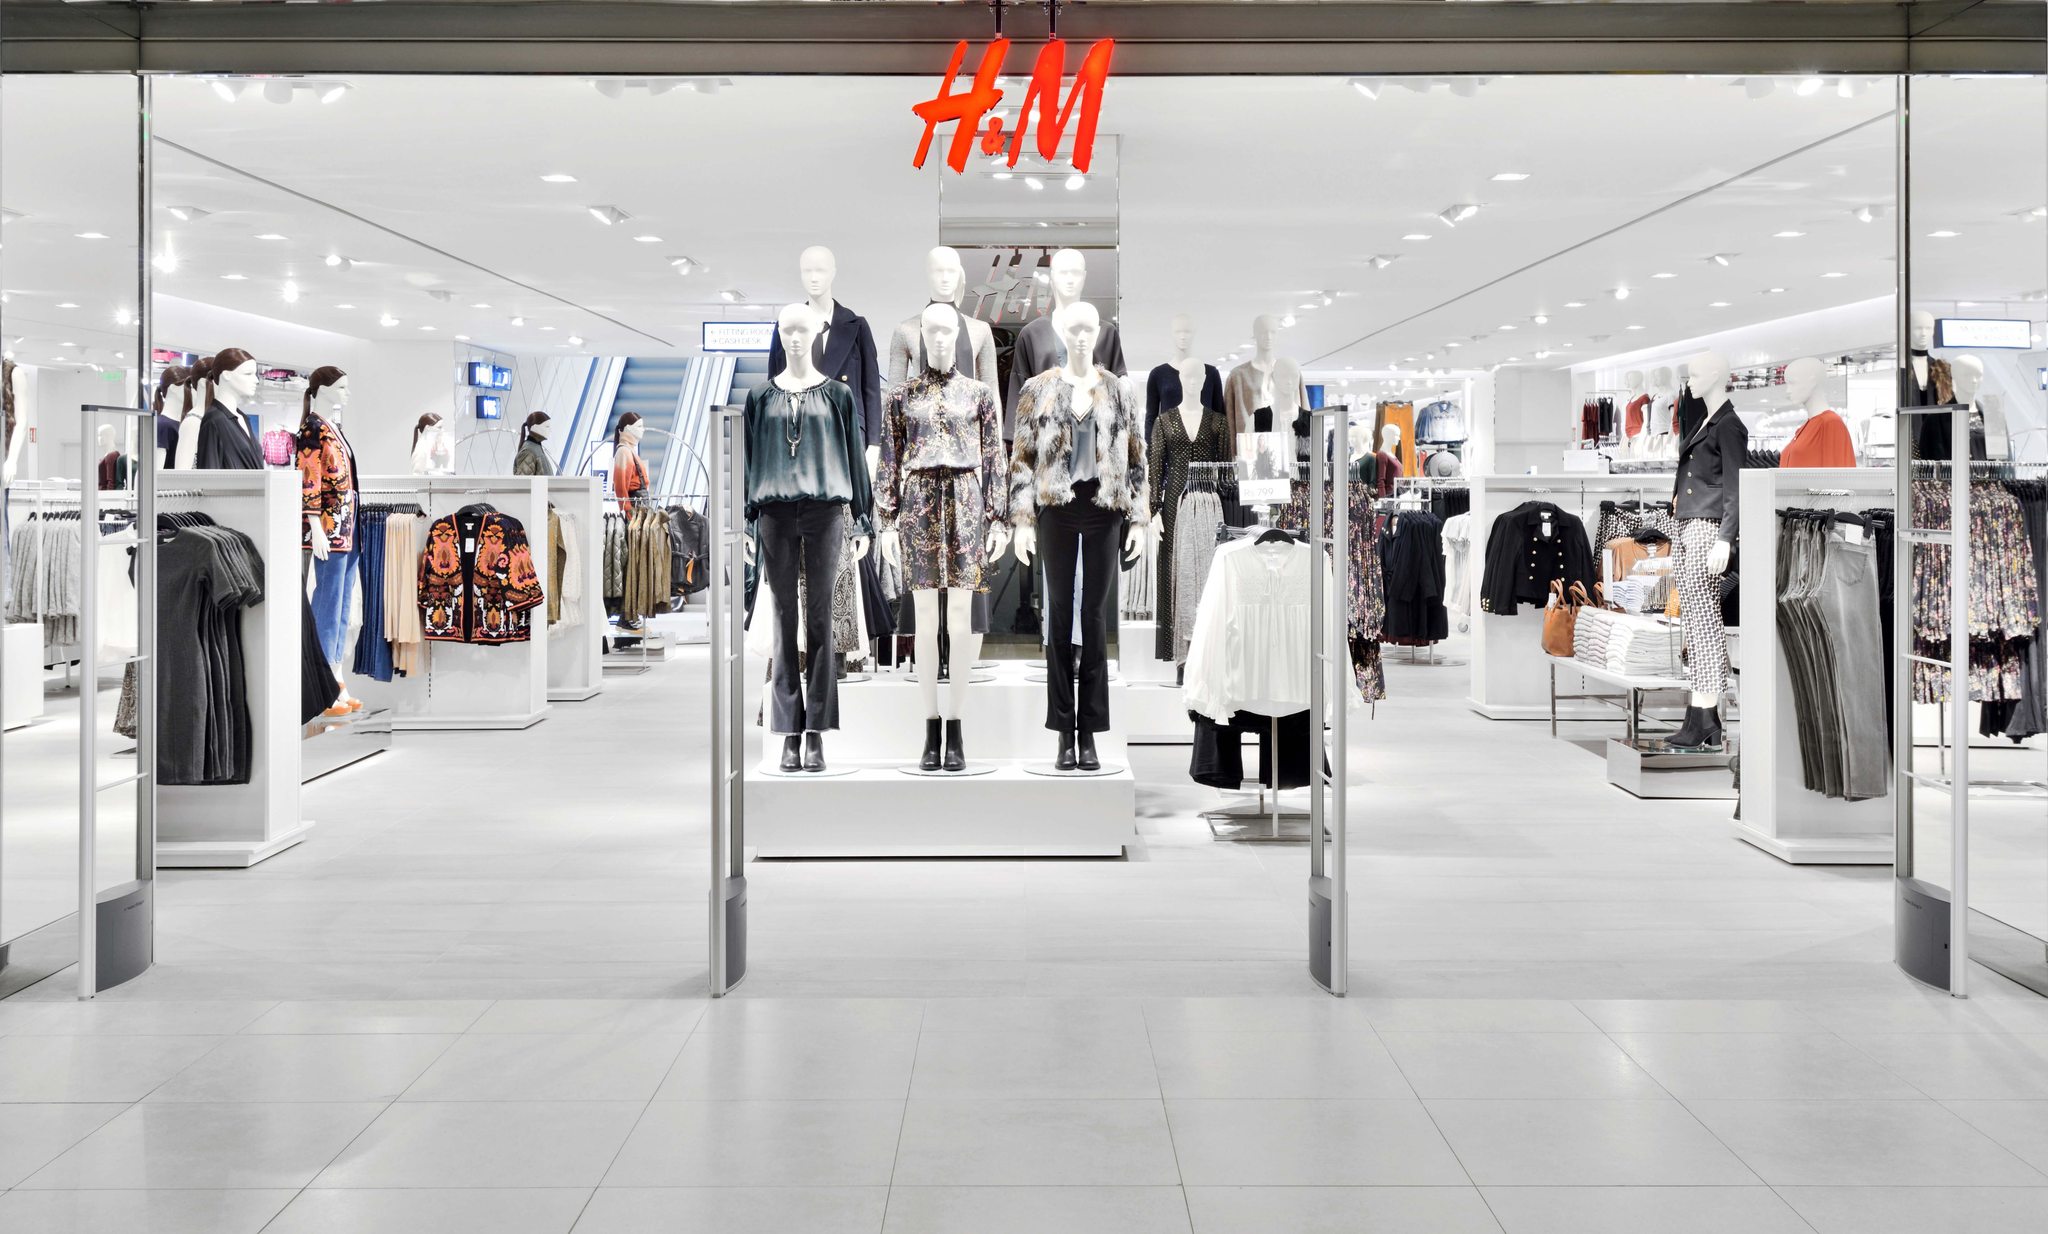 H&M Have Announce Their Biggest Drop In Profit For 6 Years